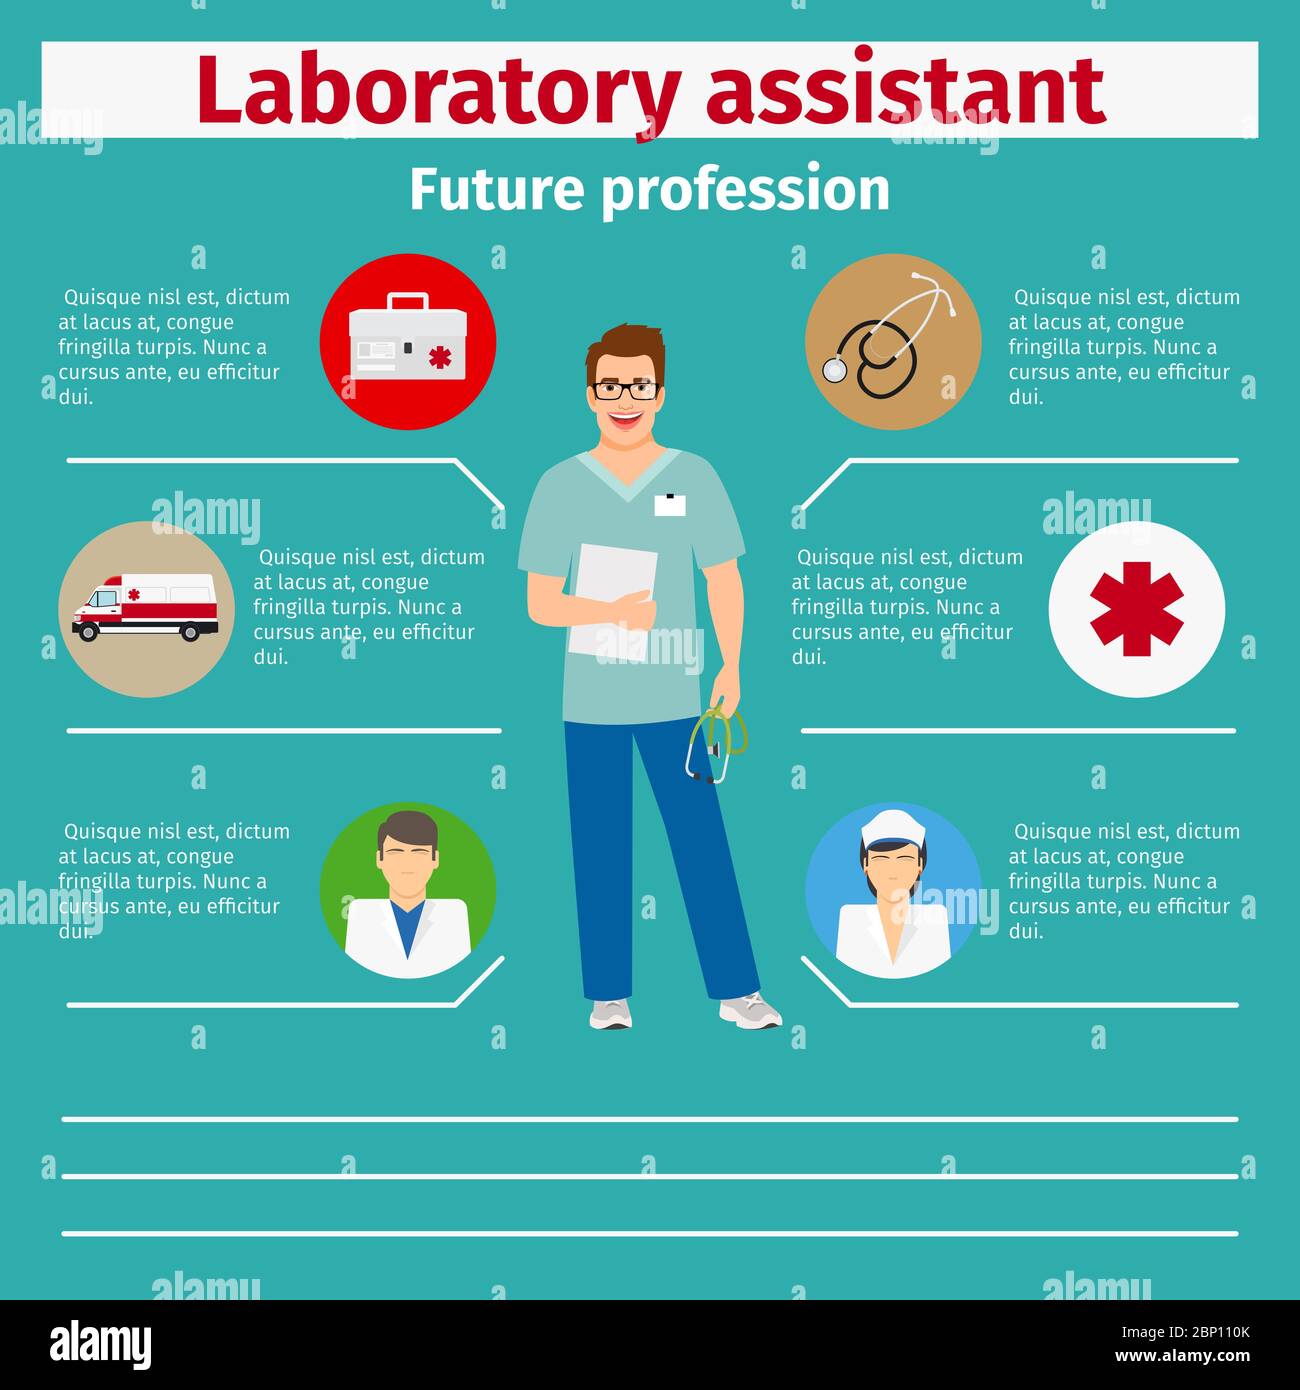 Future profession laboratory assistant infographic for students, vector illustration Stock Vector